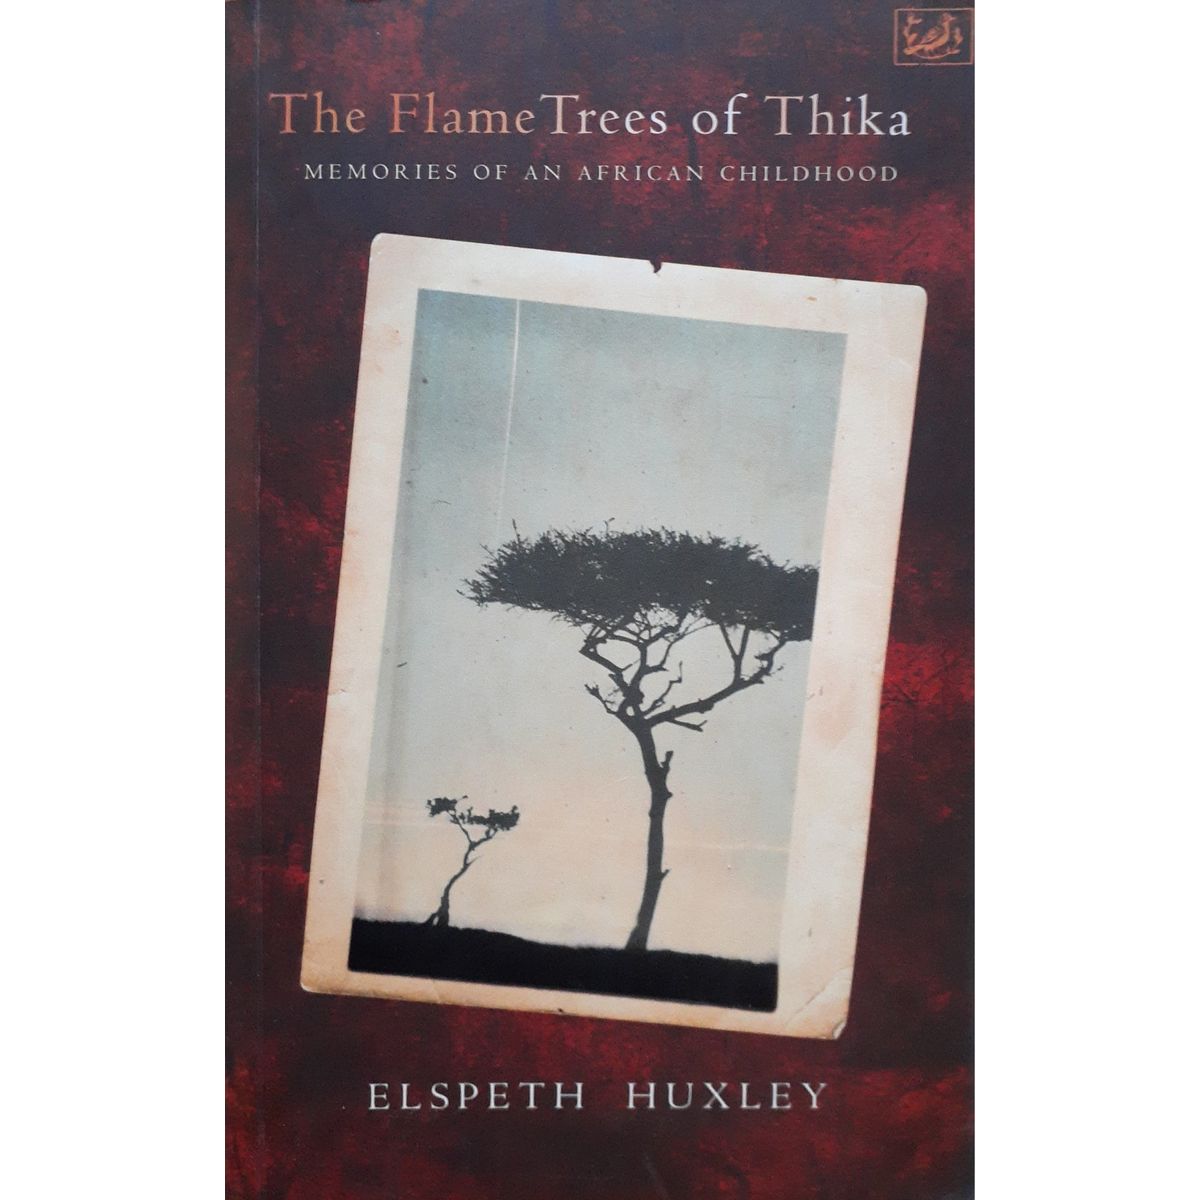 ISBN: 9780712666138 / 0712666133 - The Flame Trees of Thika by Elspeth Huxley [1998]